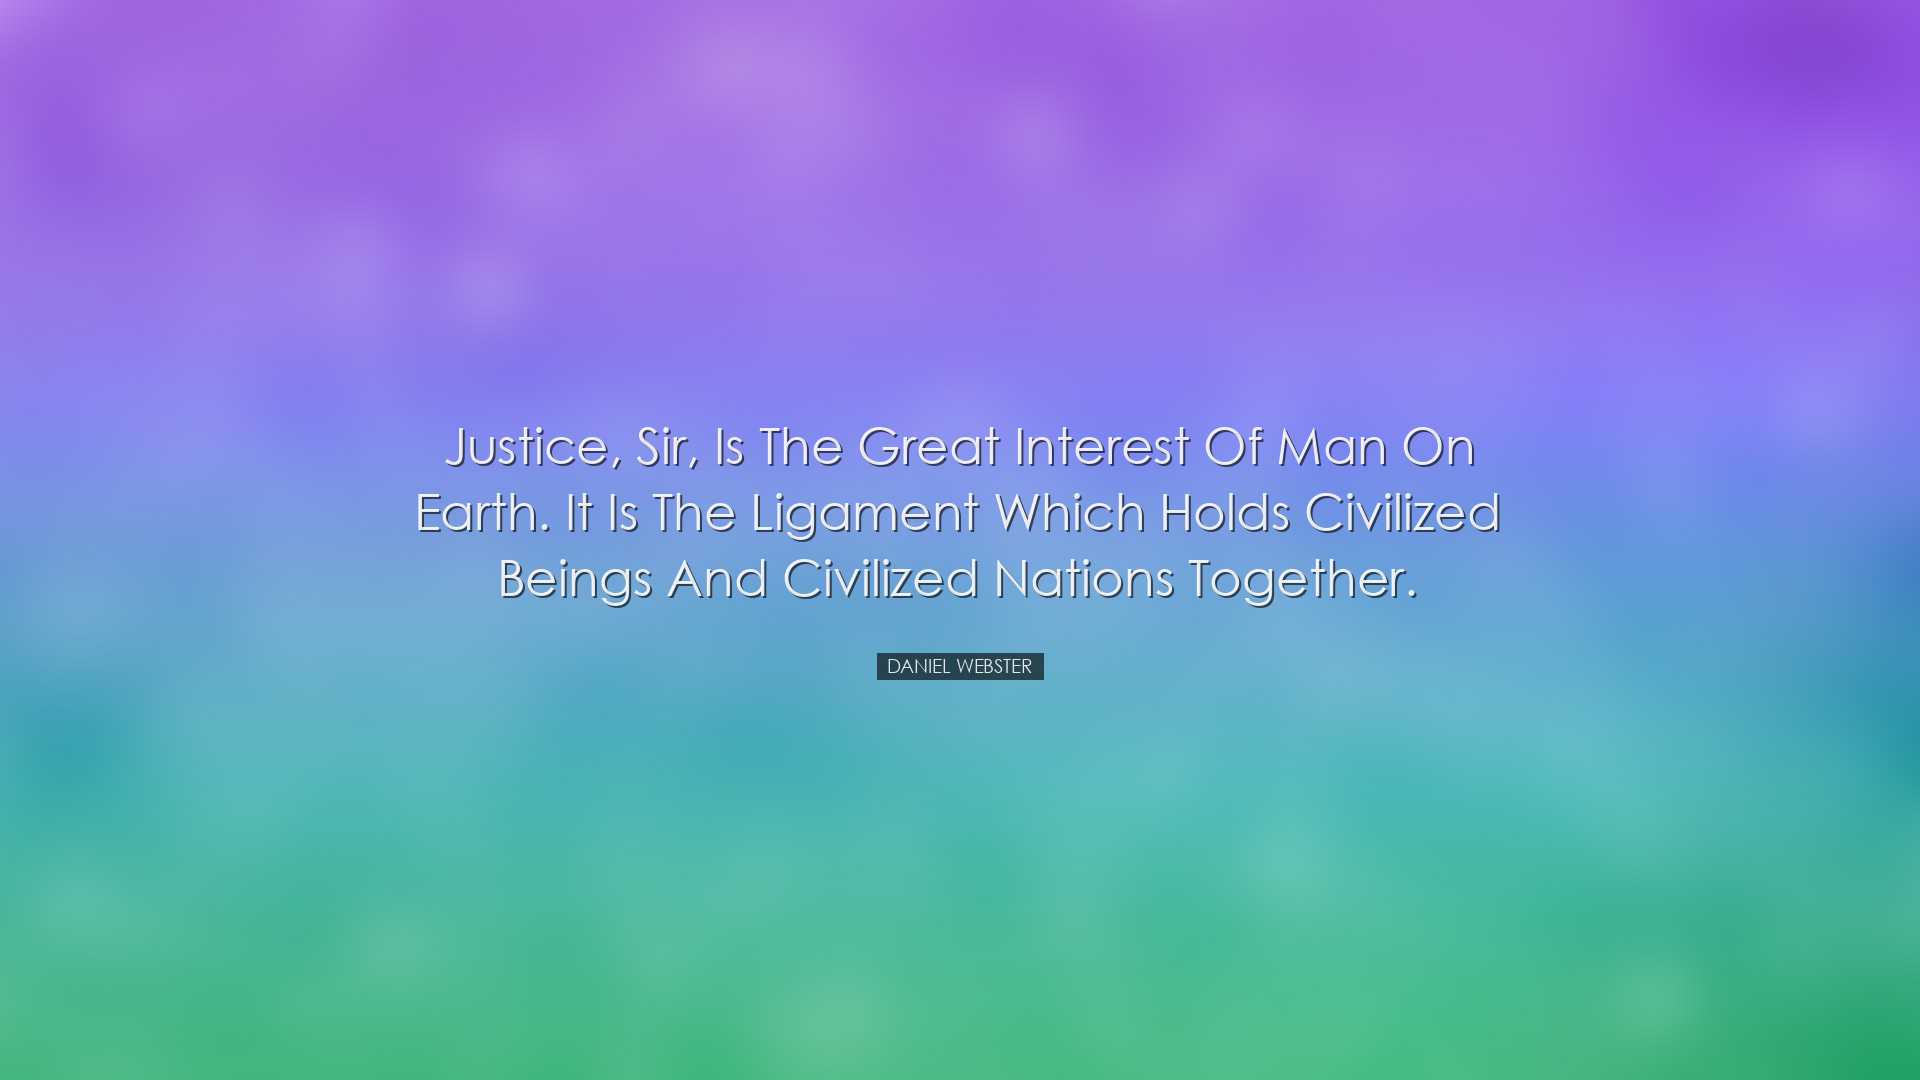 Justice, sir, is the great interest of man on earth. It is the lig